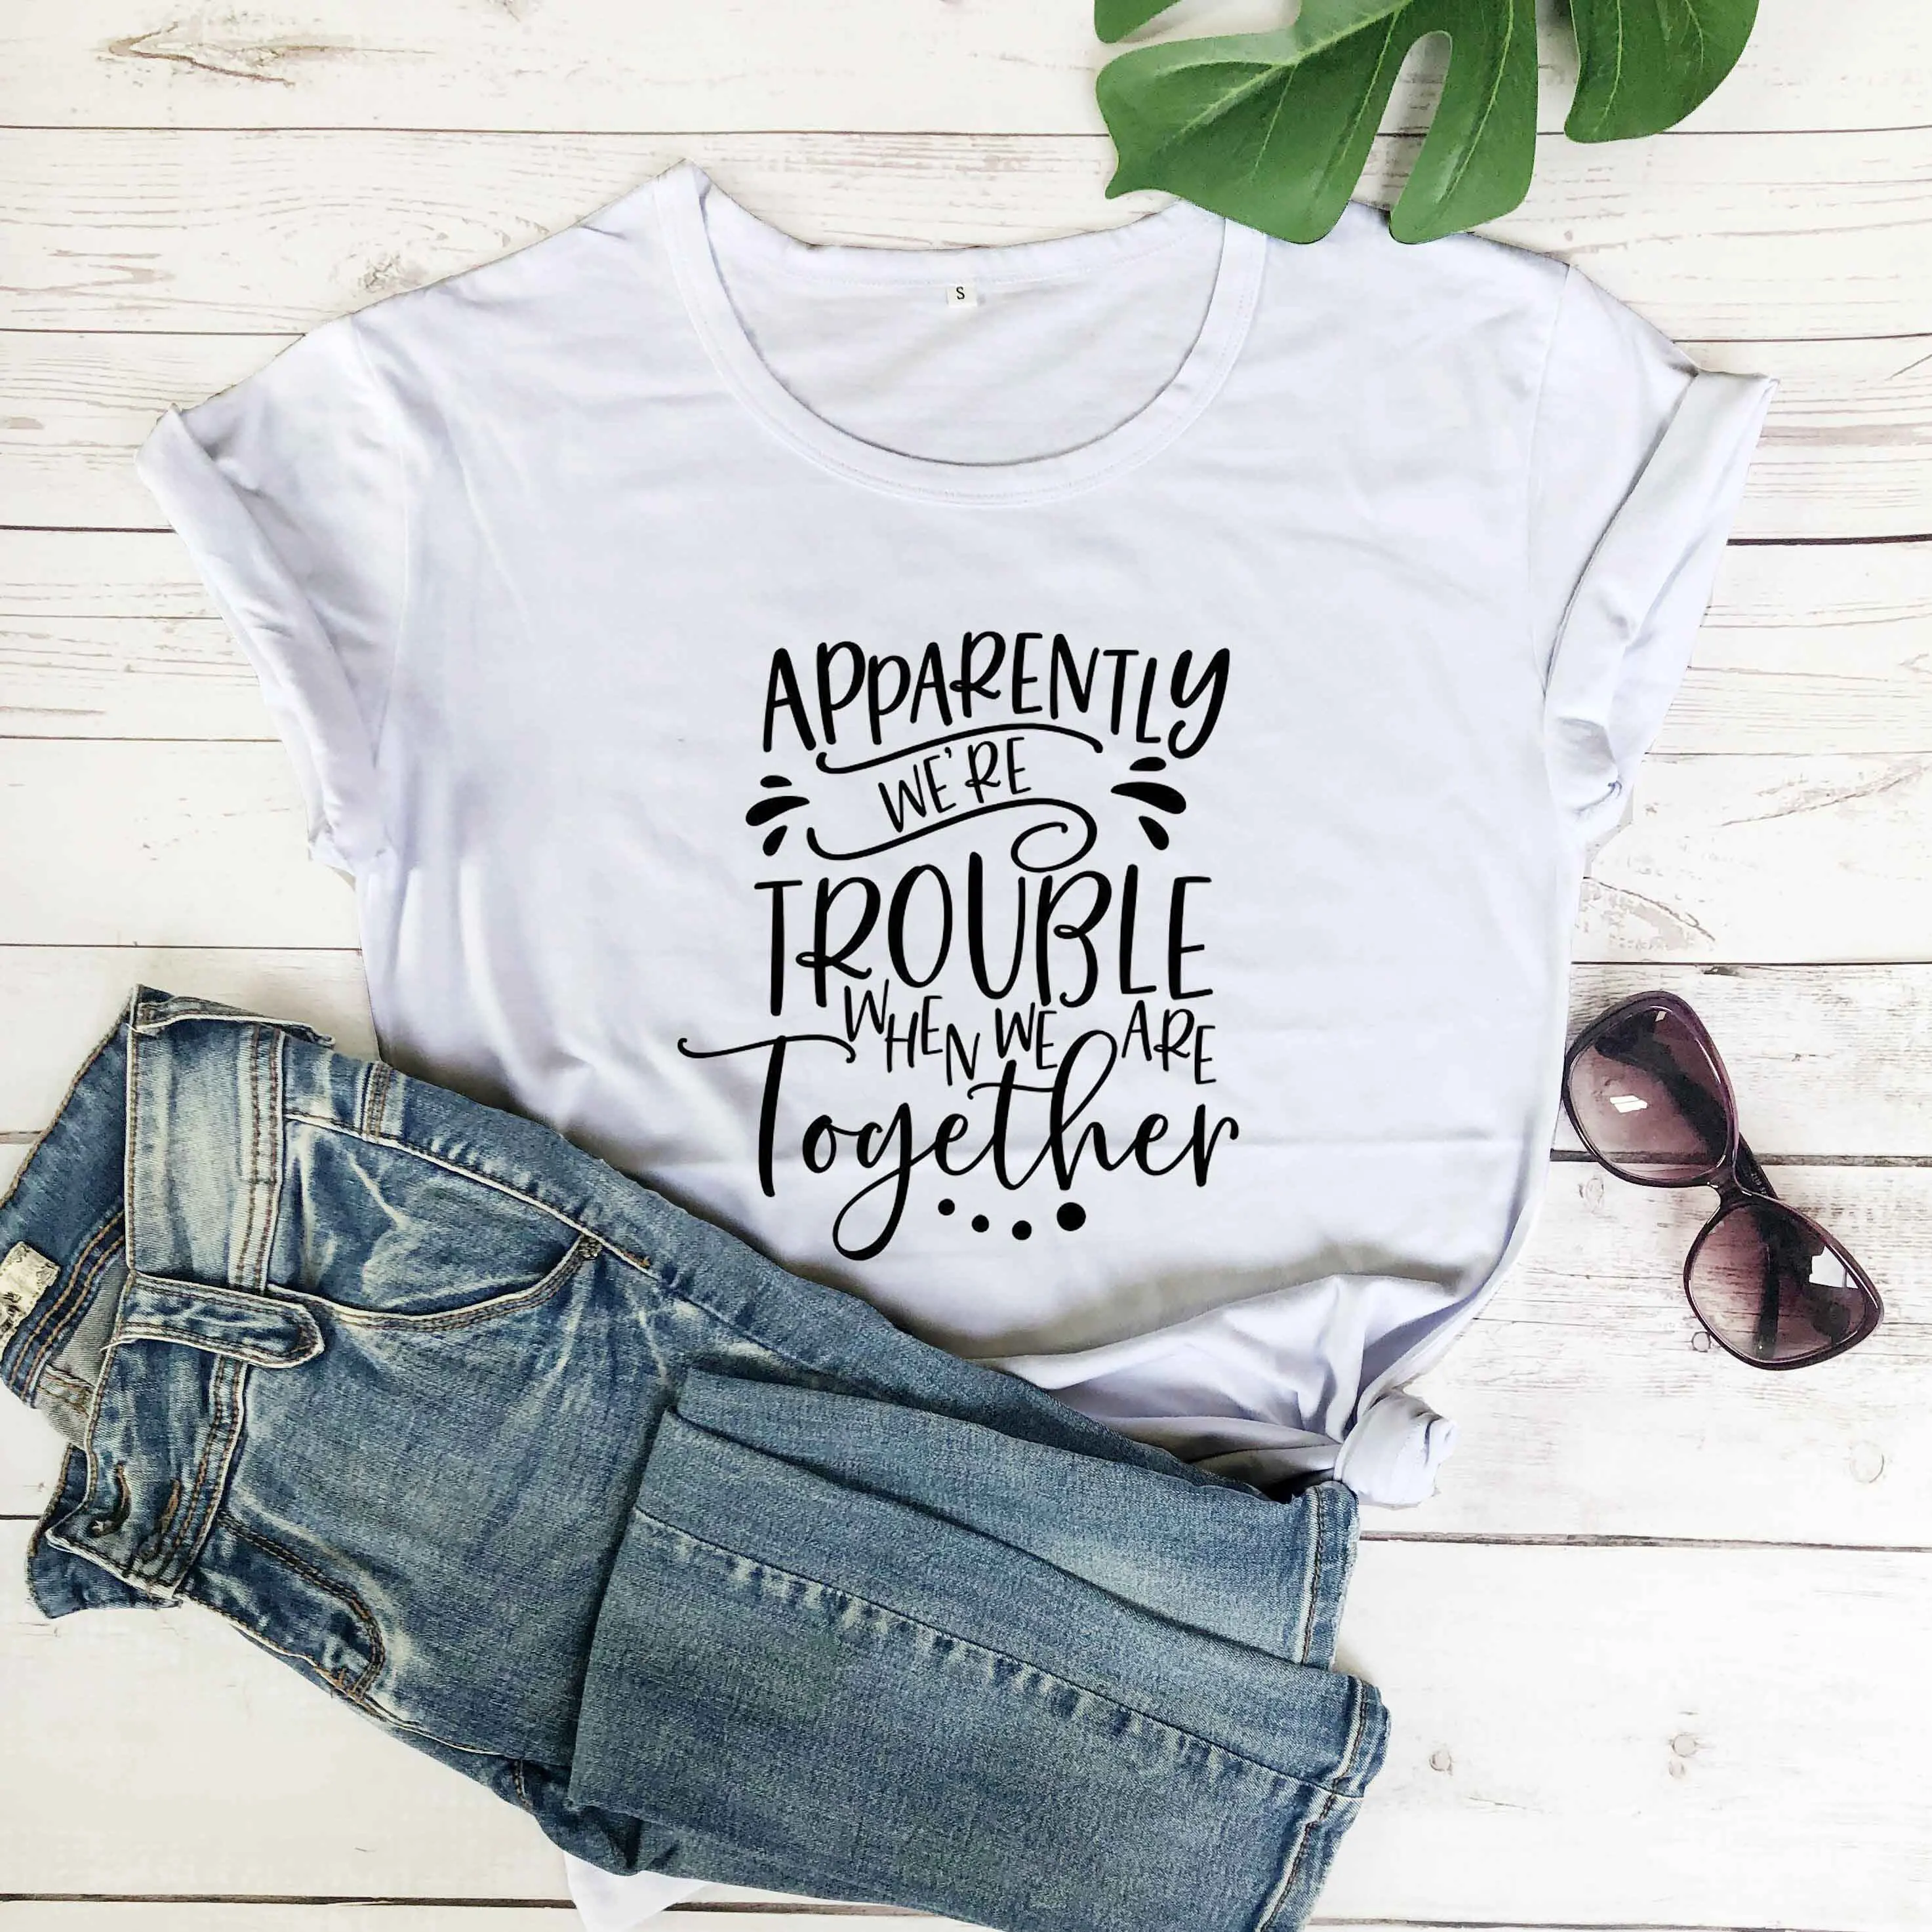 

Apparently we're trouble when we are together slogan fashion funny grunge tumblr t shirt cute street style young tees tops-L844